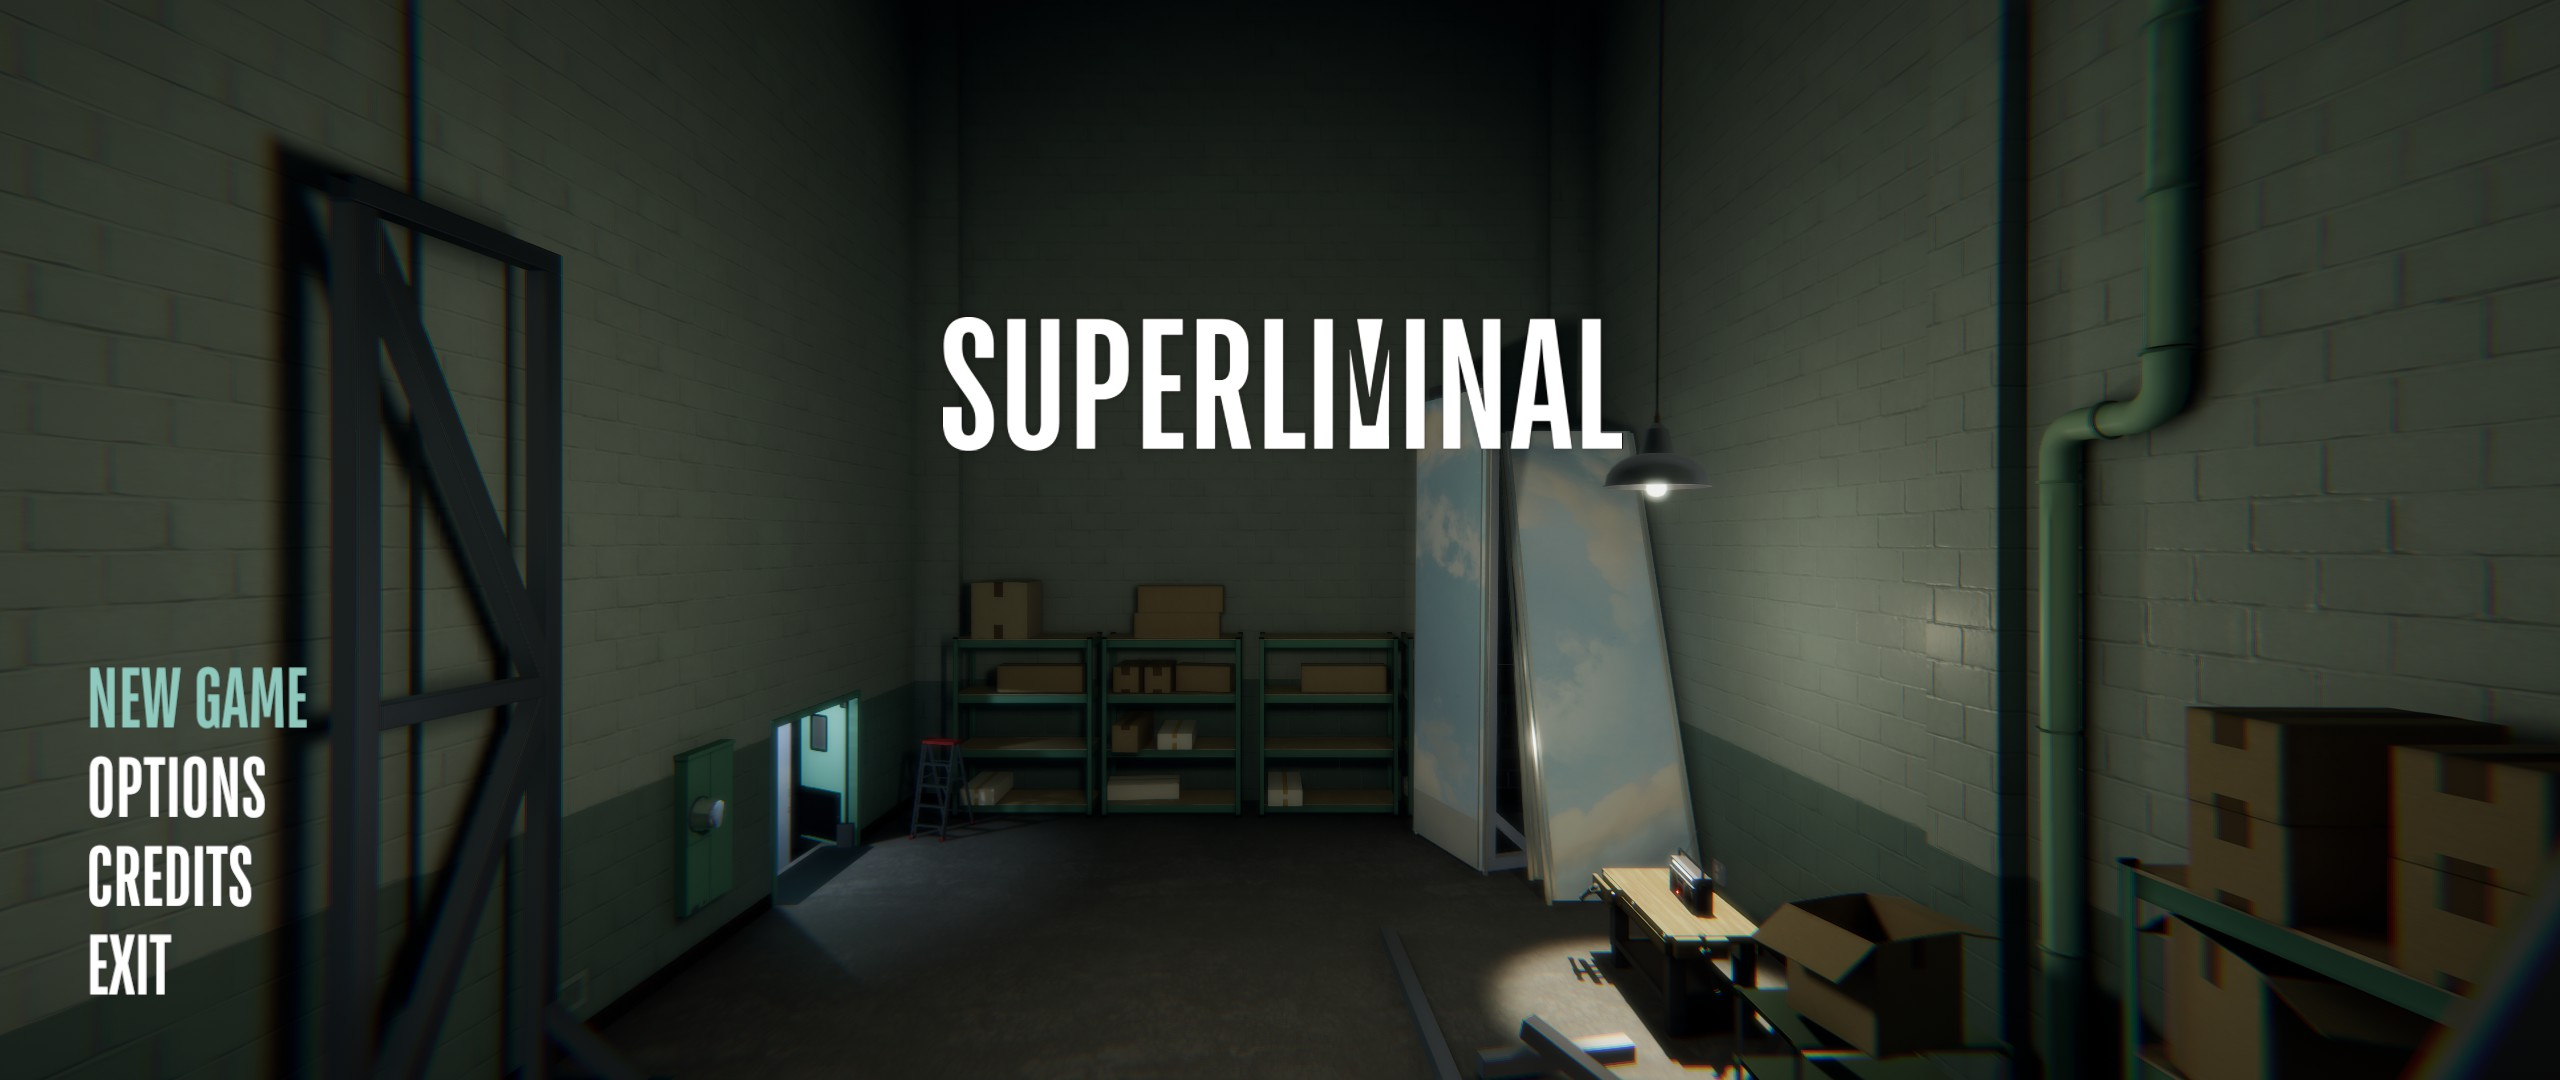 Superliminal ultrawide patcher - Unofficial patches - PCGamingWiki ...